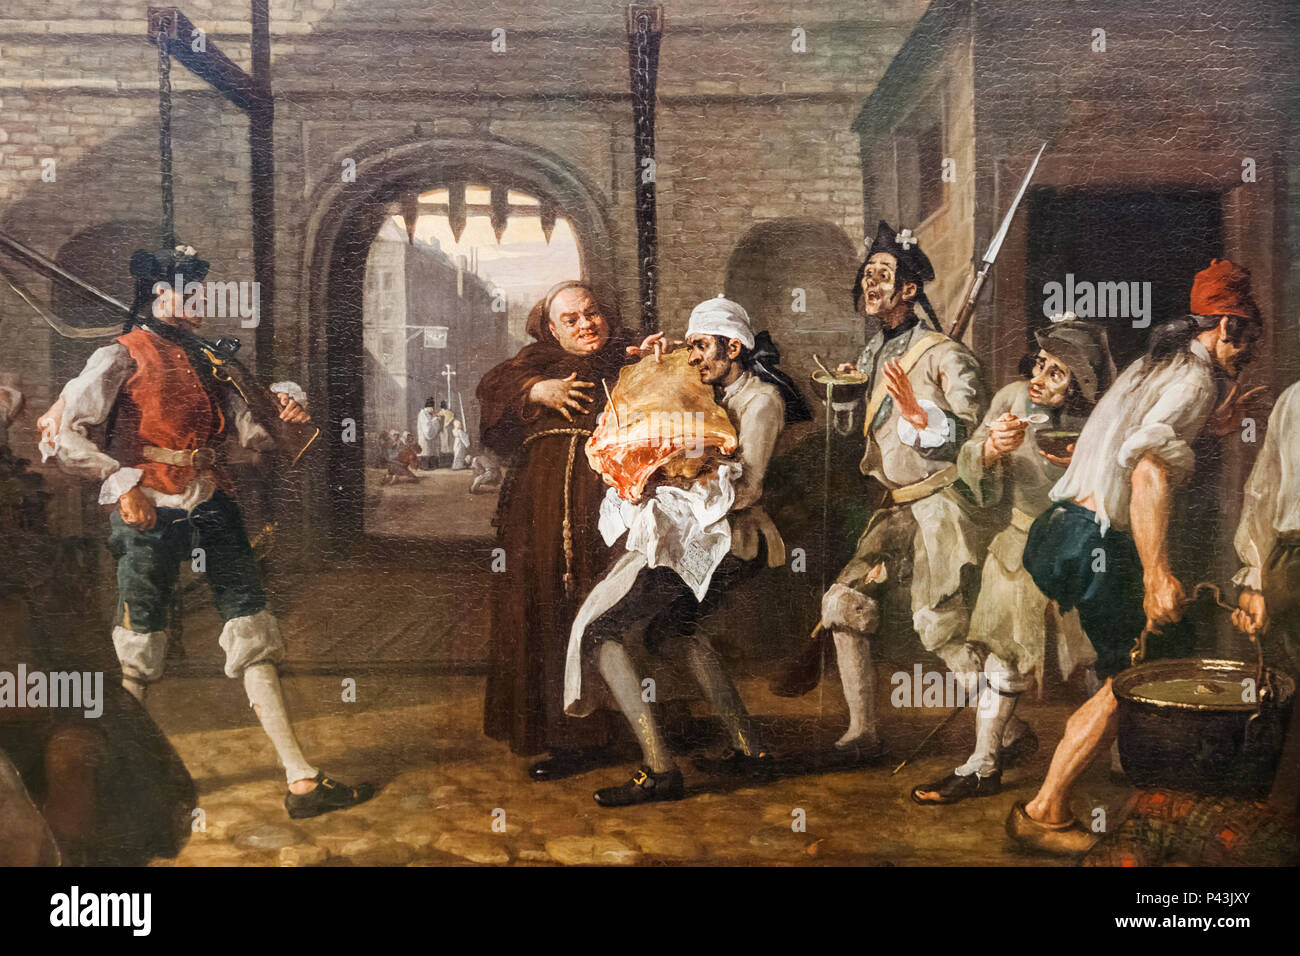 Painting titled 'O the Roast Beef of Old England (The Gate of Calais)', by William Hogarth dated 1748 Stock Photo